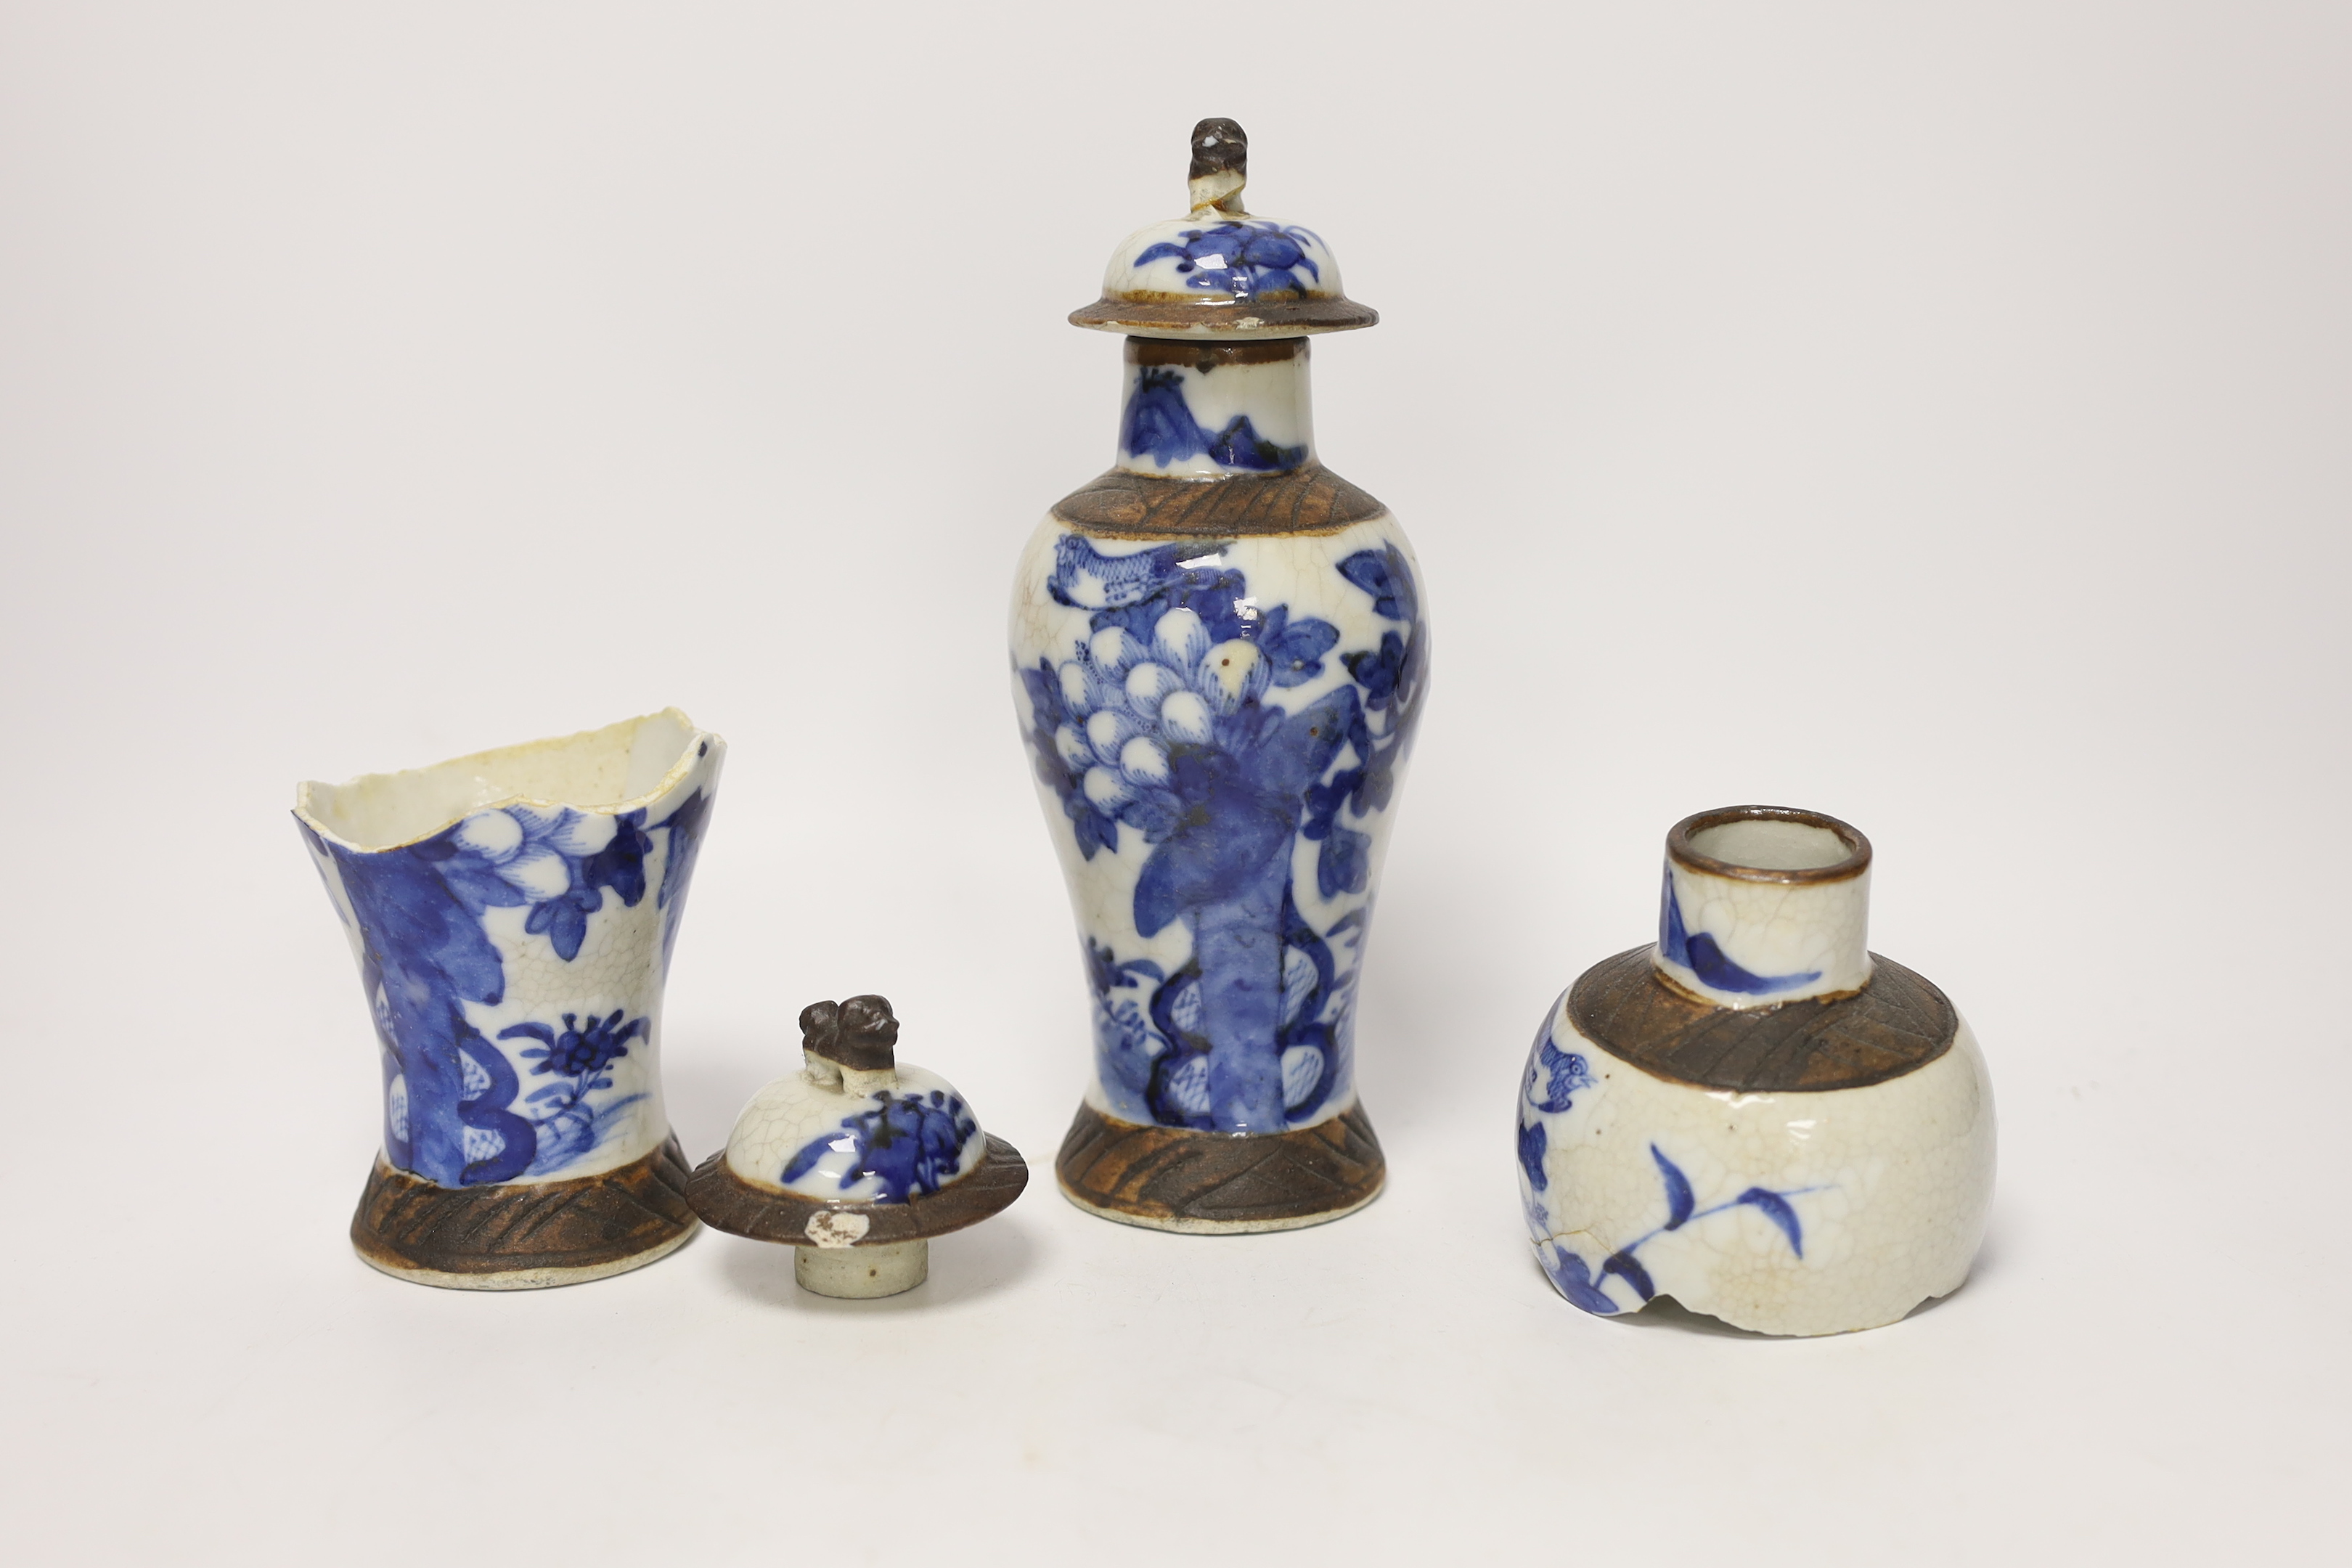 A pair of 19th century Chinese crackleware vases and covers, 15cm high (one badly broken)